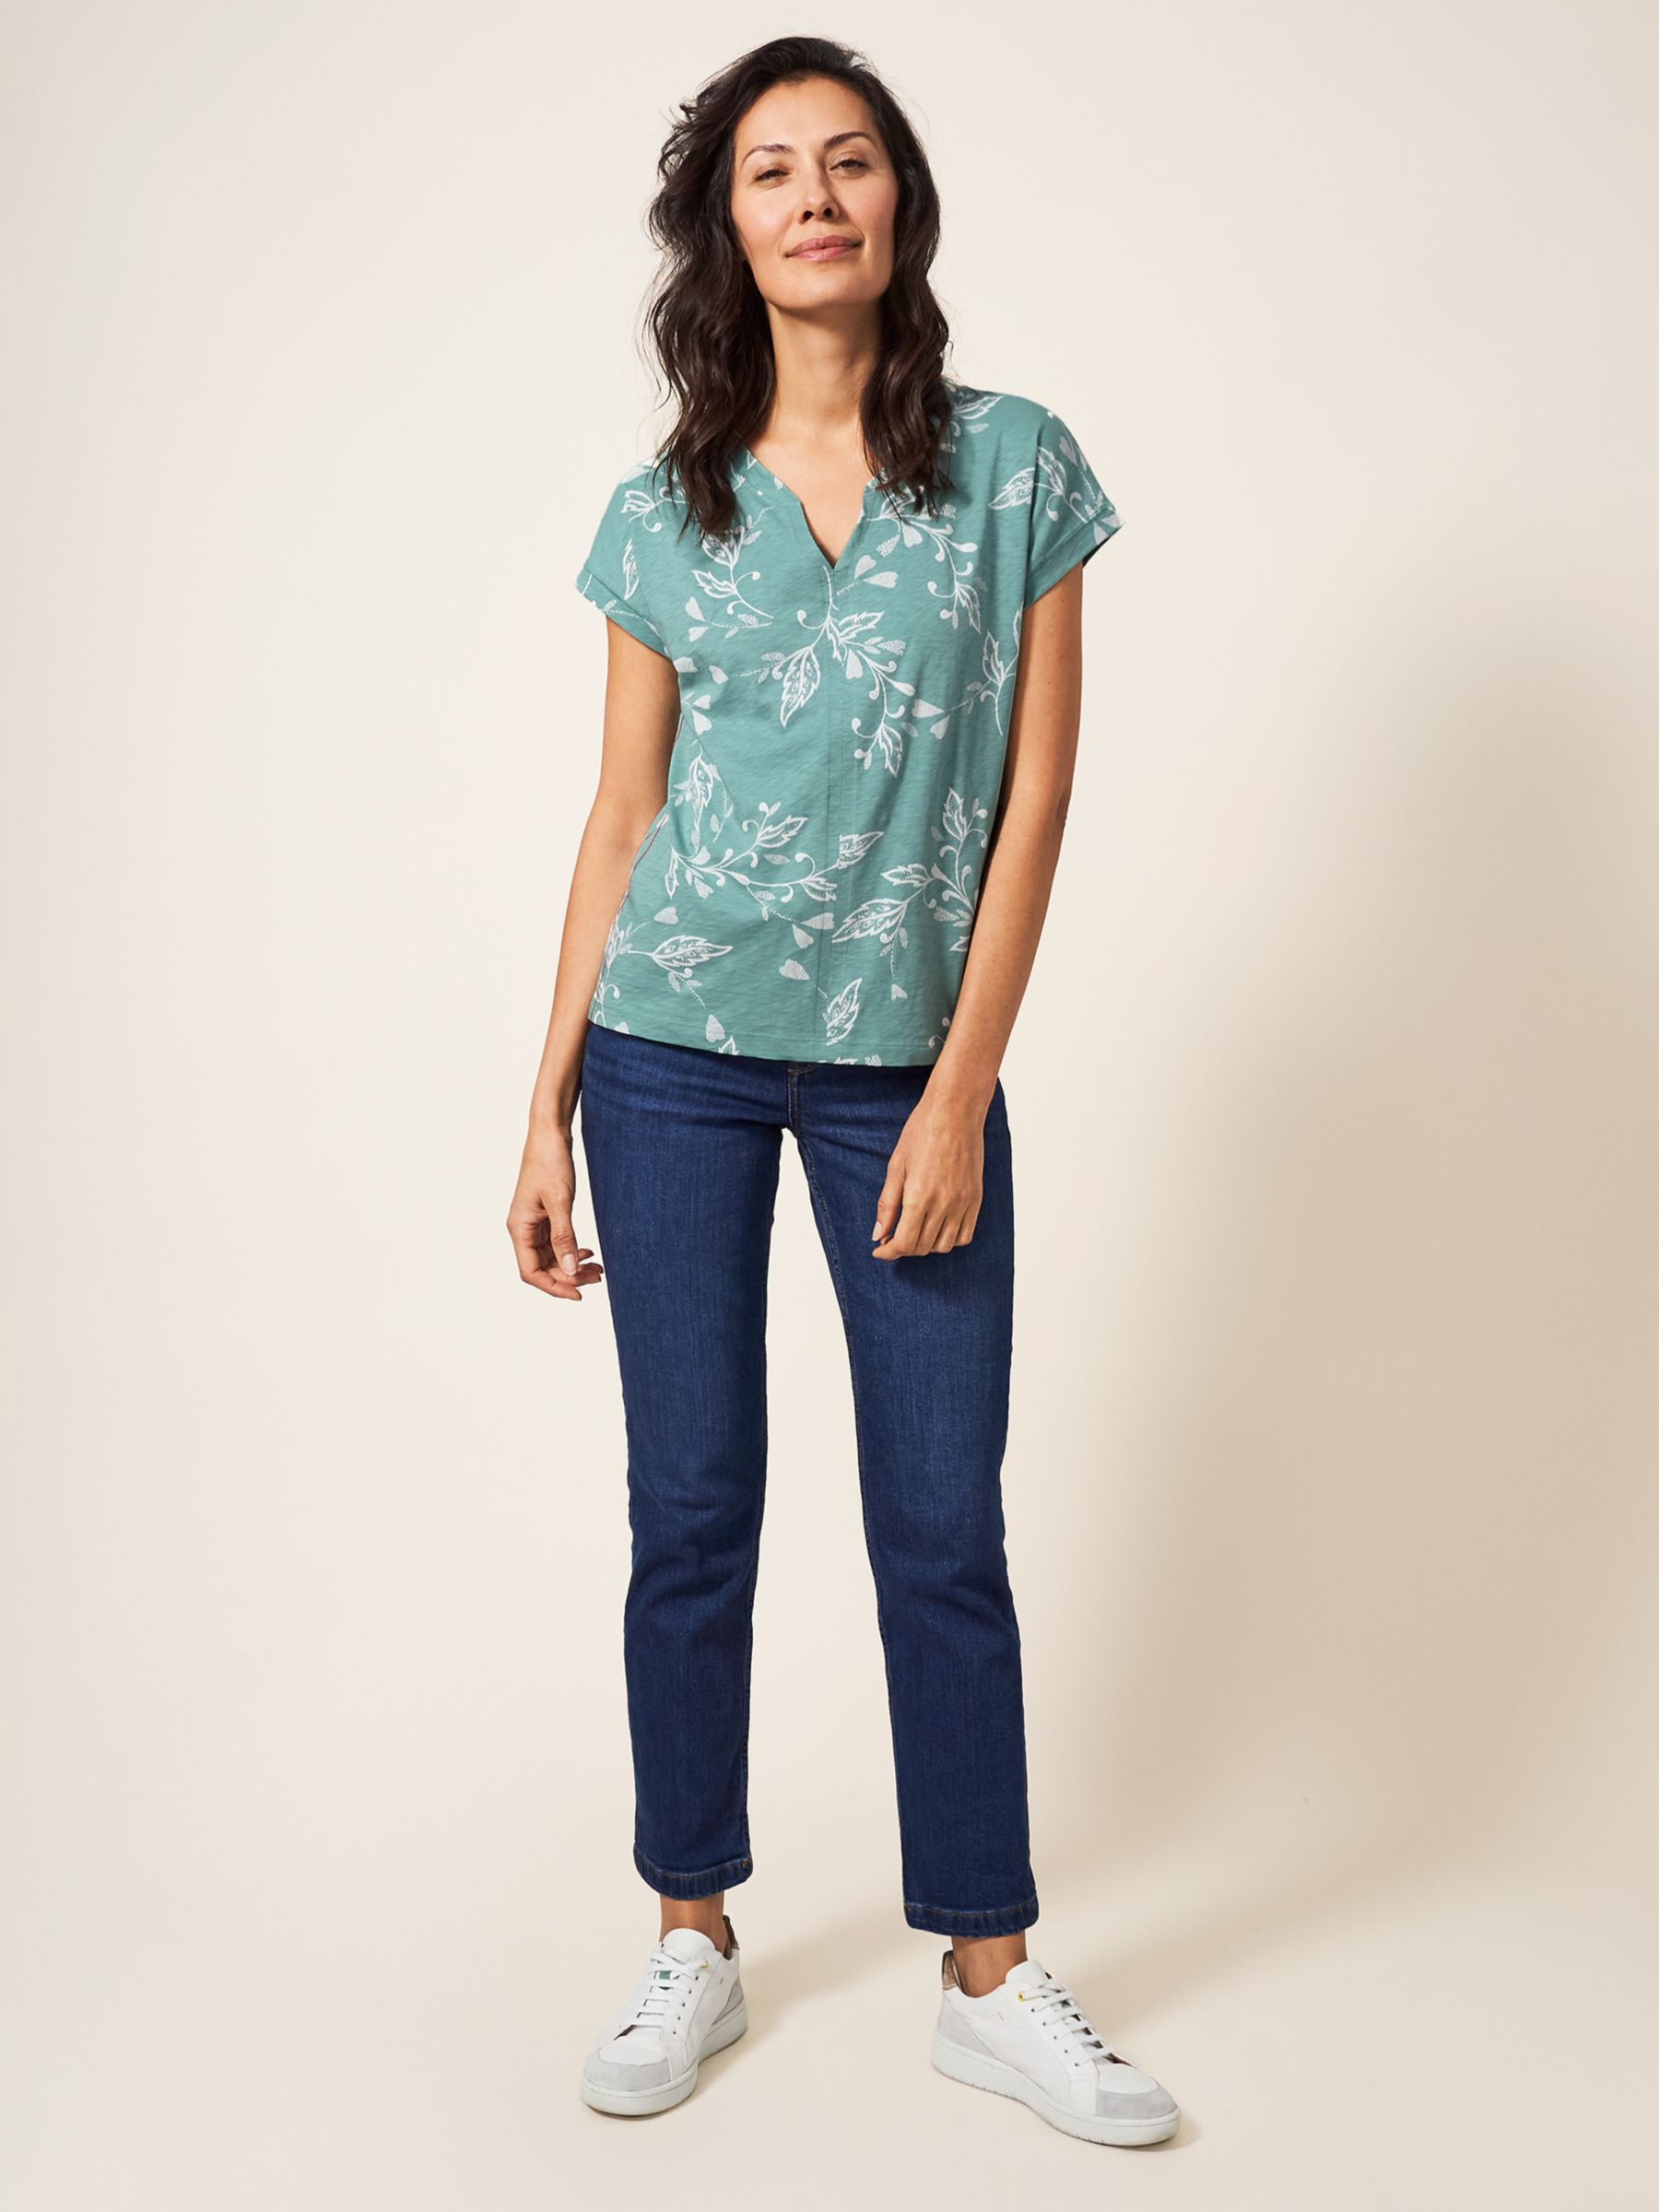 White Stuff Nelly Notch Neck T-Shirt, Teal at John Lewis & Partners